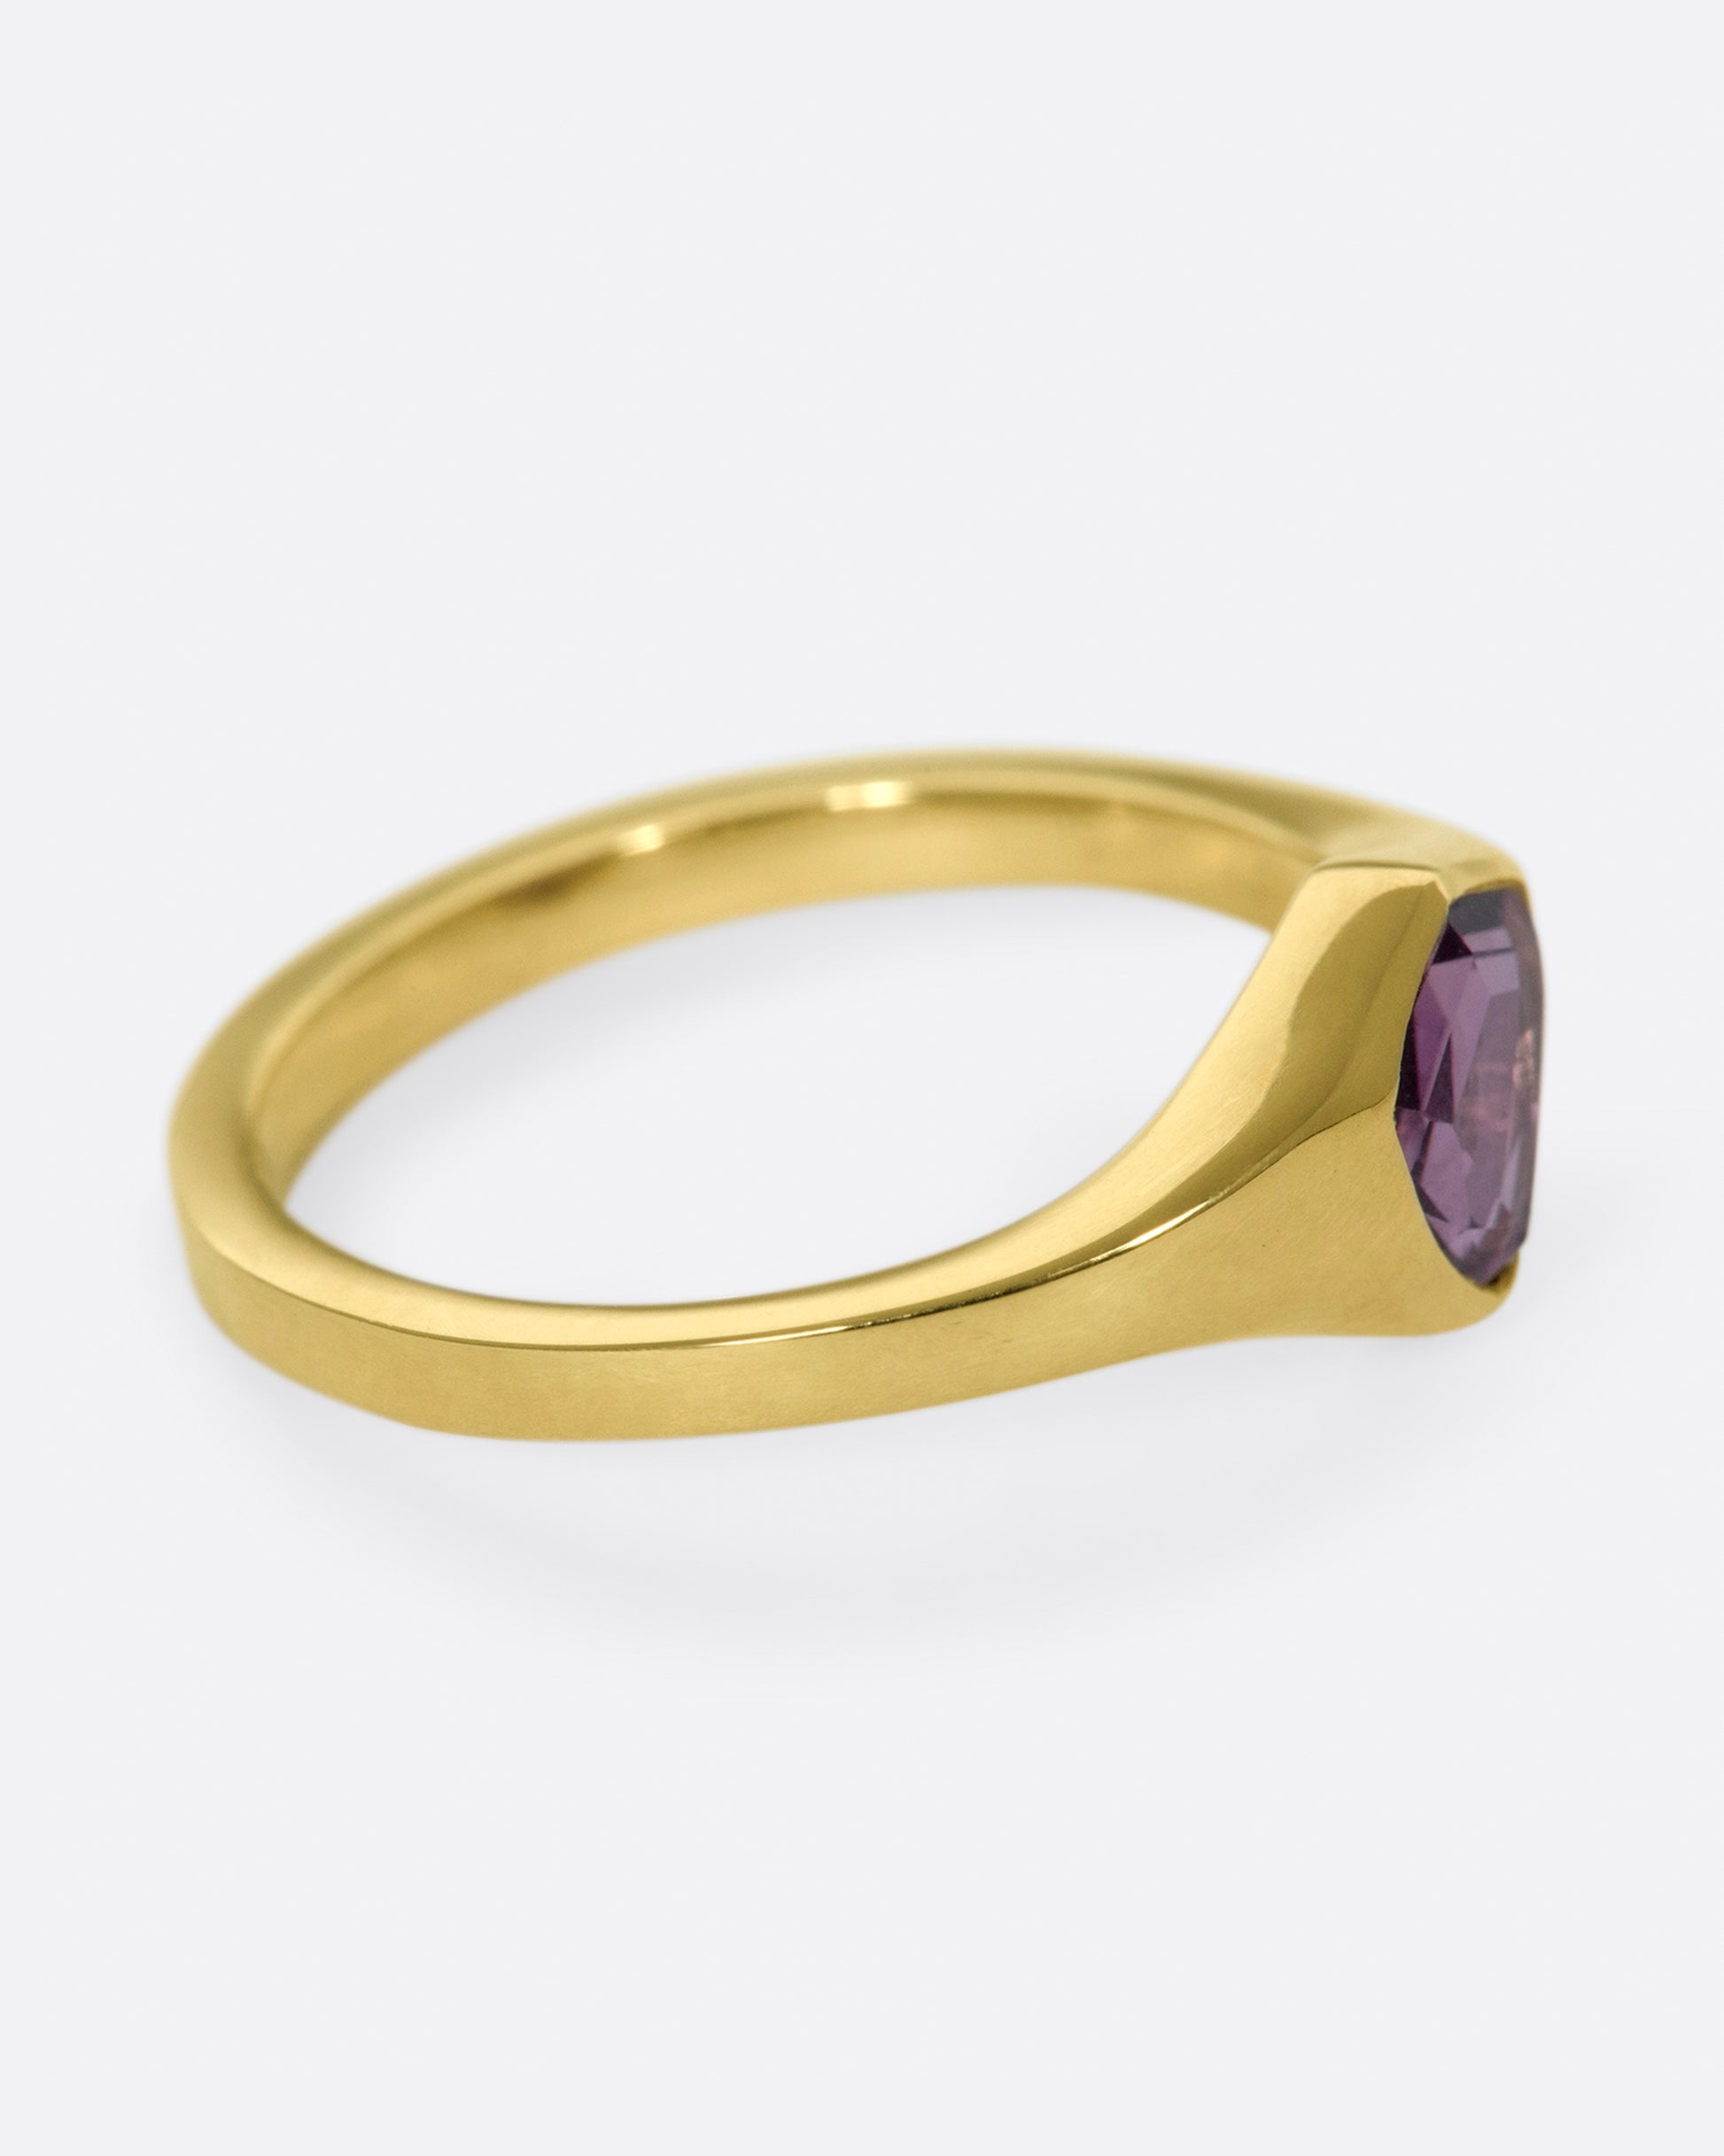 A classic, polished gold signet ring with a burgundy sapphire at its center.